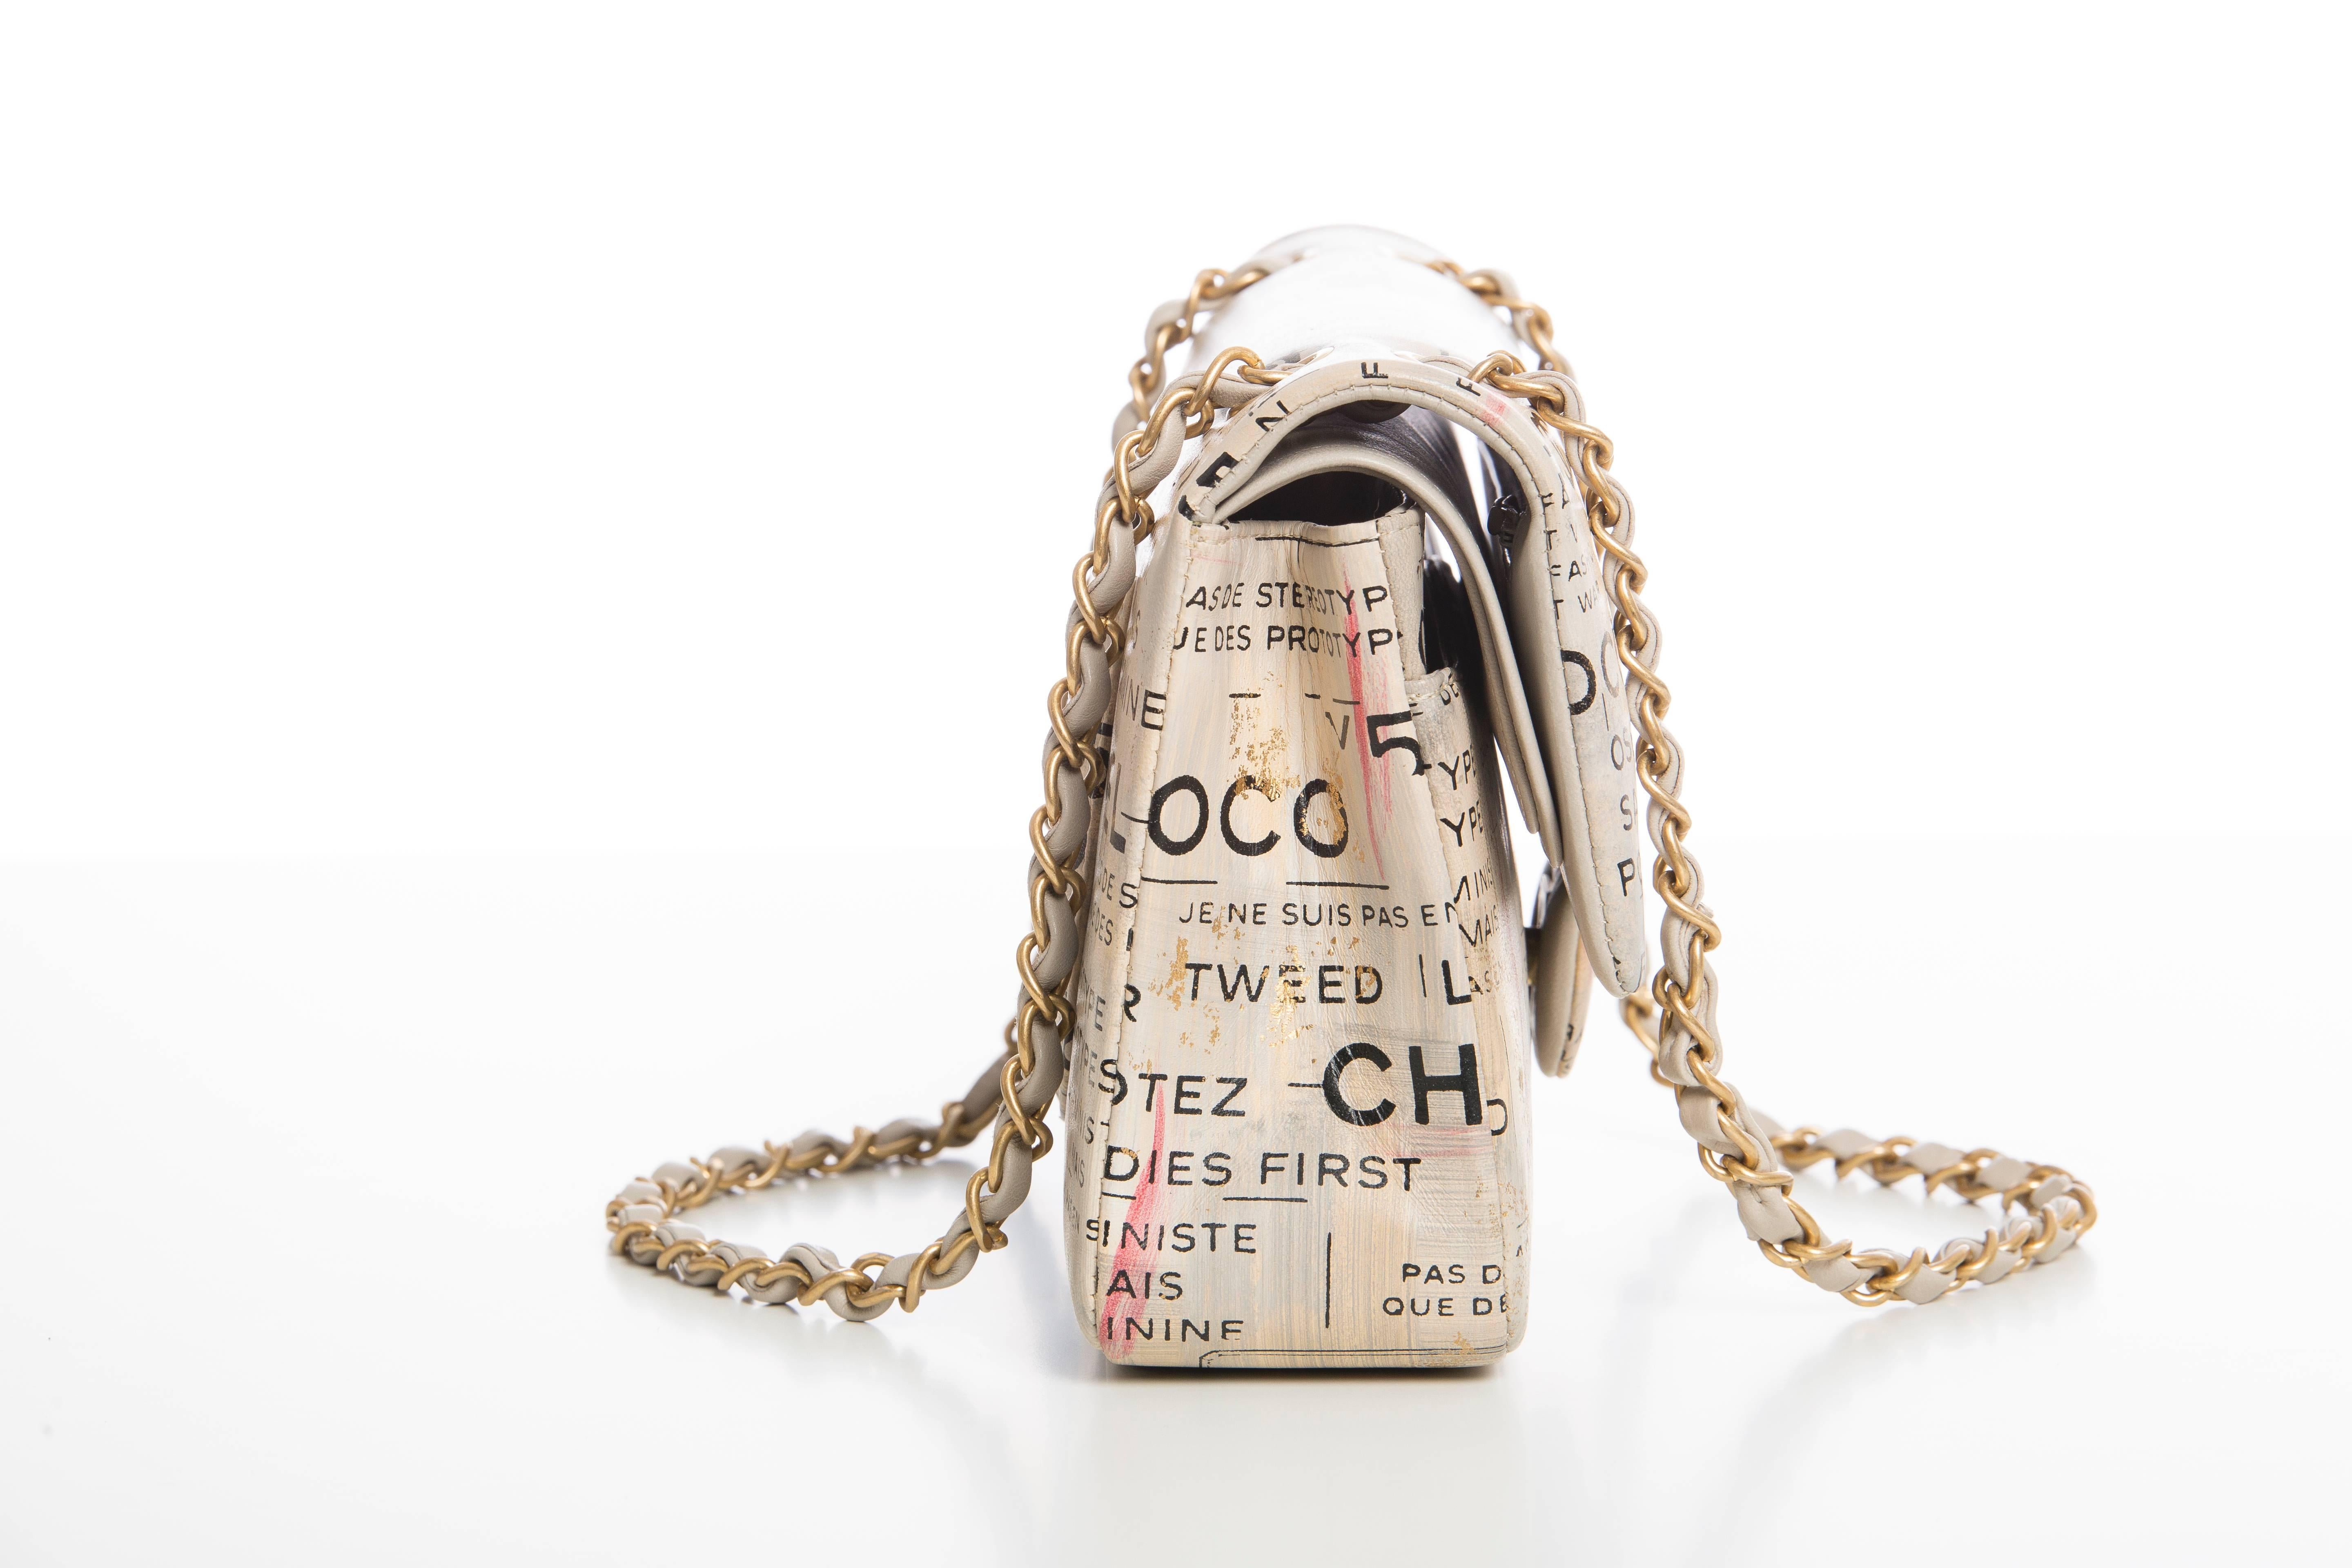 Beige Chanel Limited Edition Graffiti Newspaper Print Double Flap Bag, Spring 2015